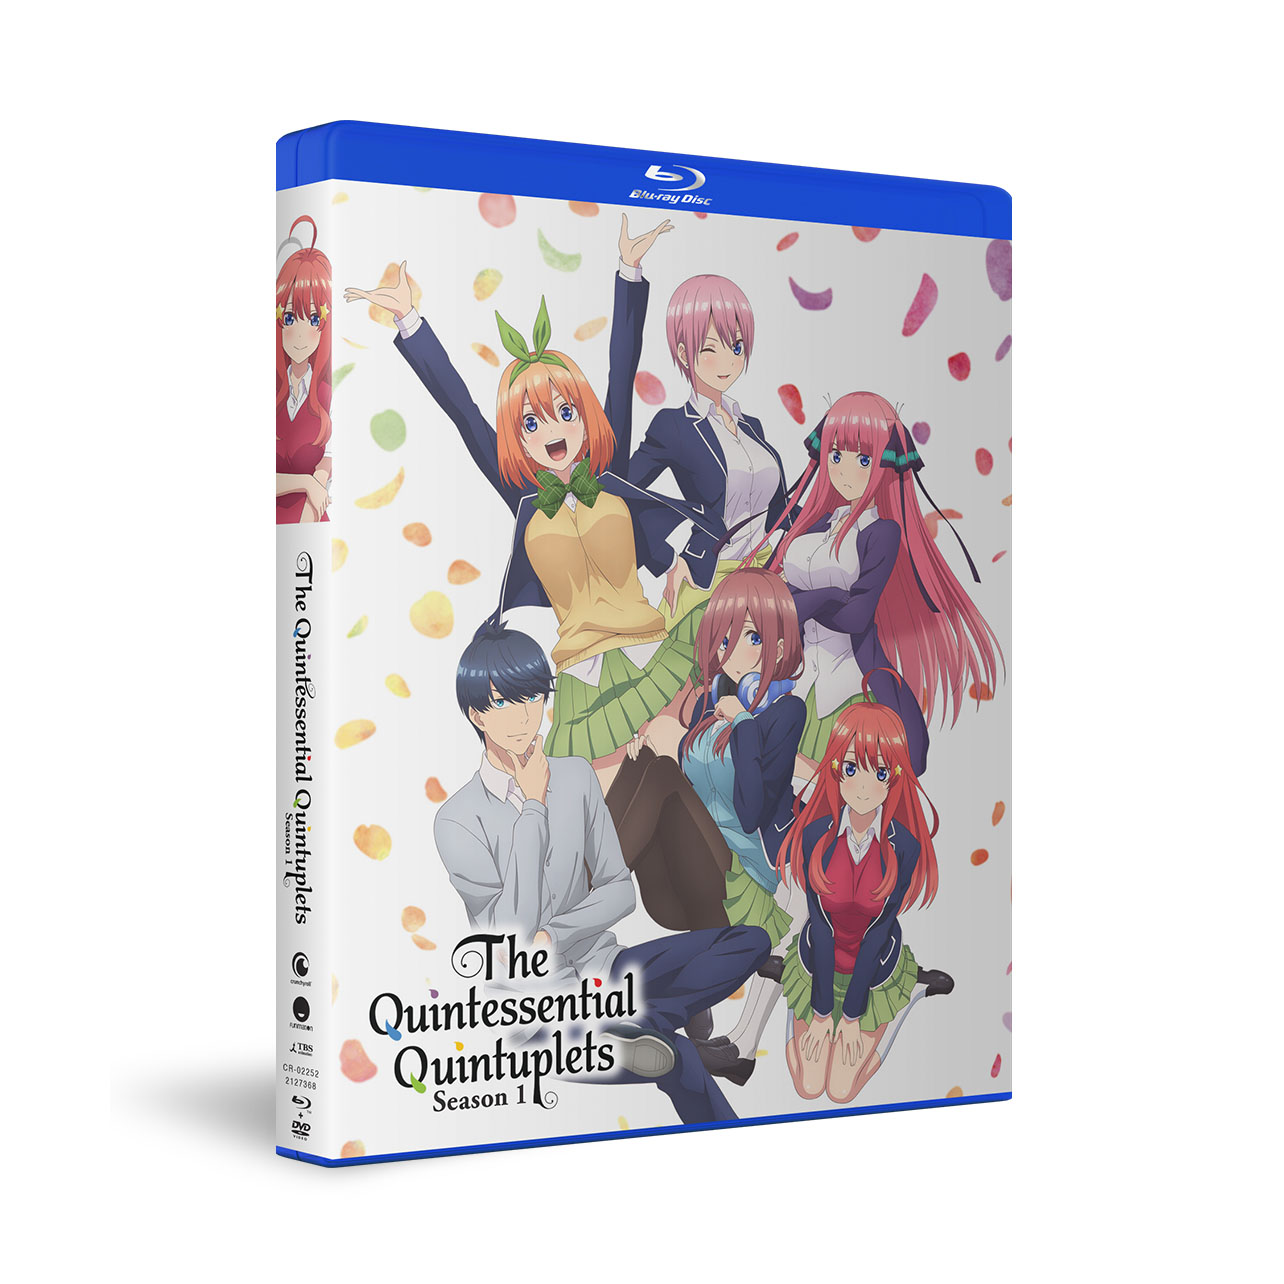 The Quintessential Quintuplets - Season 1 - Blu-ray + DVD image count 2